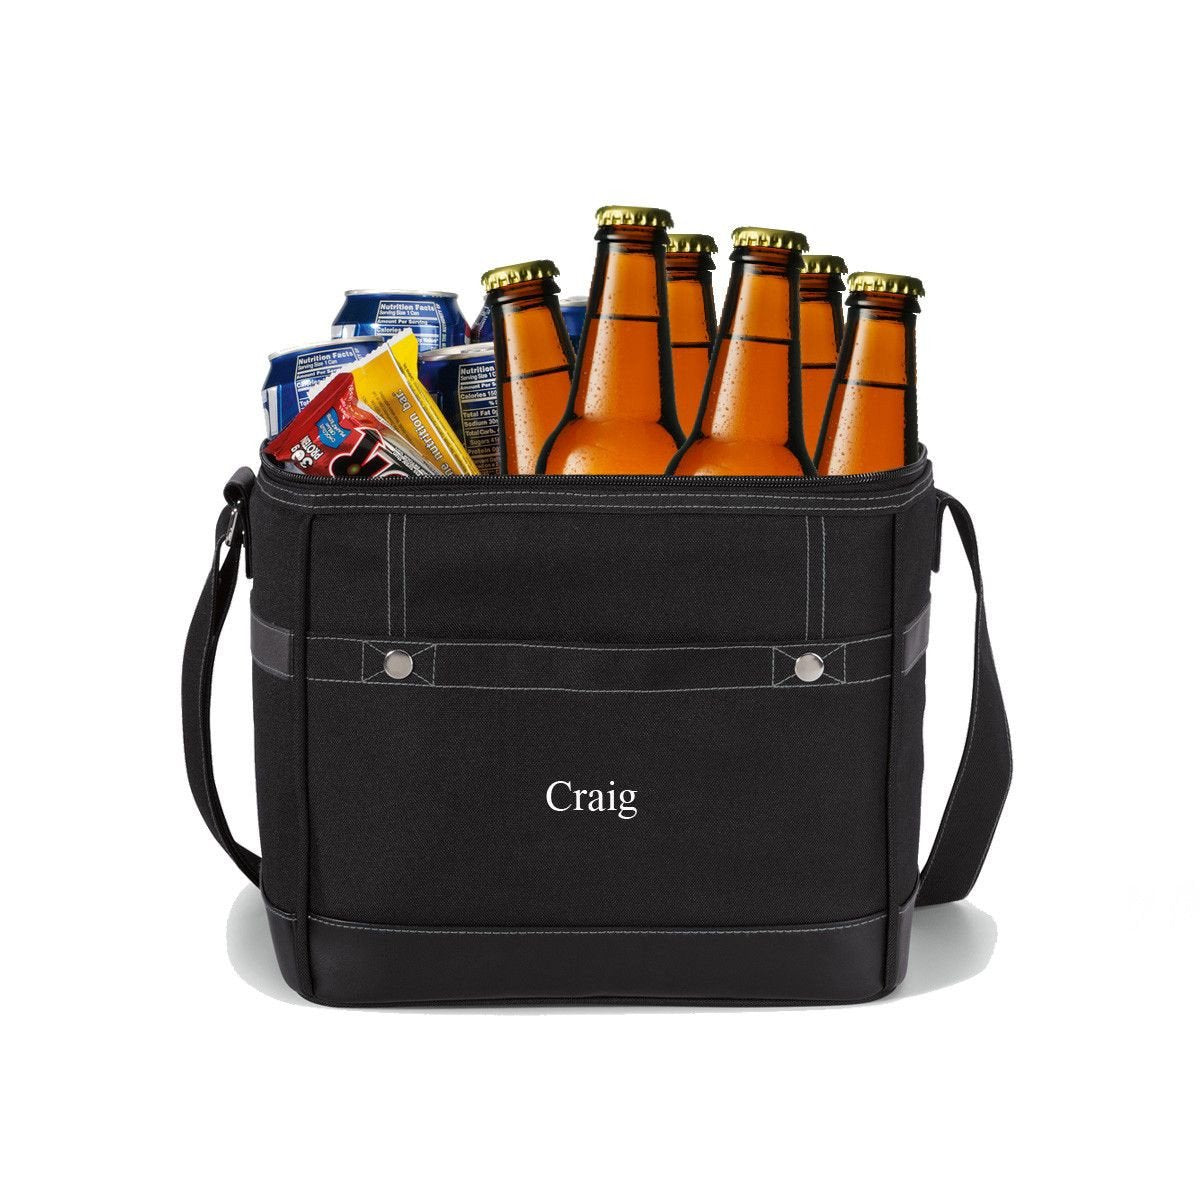 Personalized 12-Pack Cooler Tote